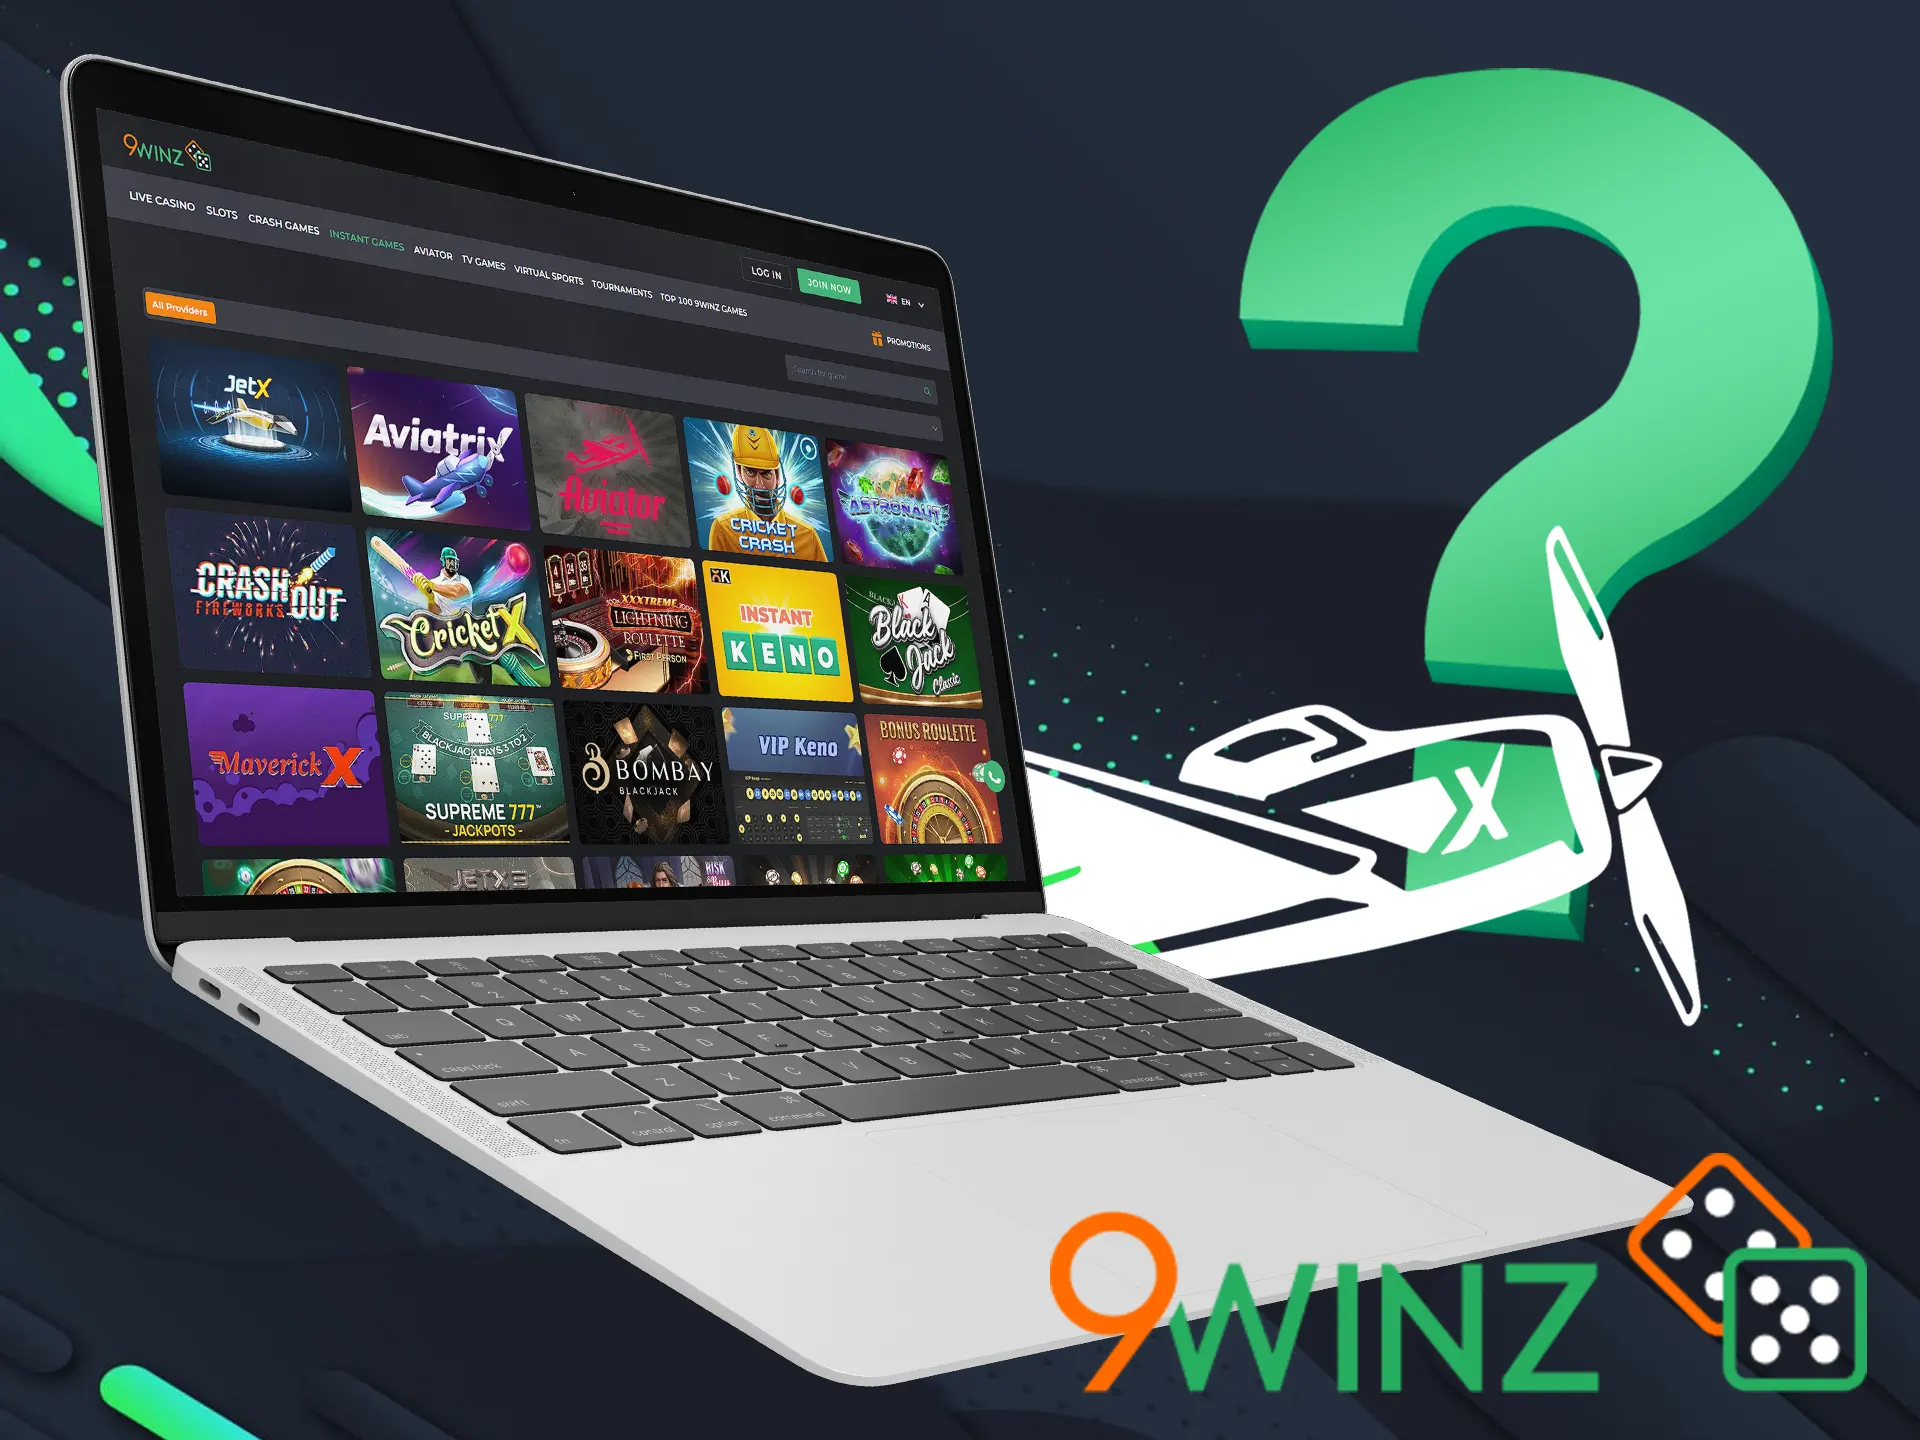 Learn how to play instant games at the 9winz casino.